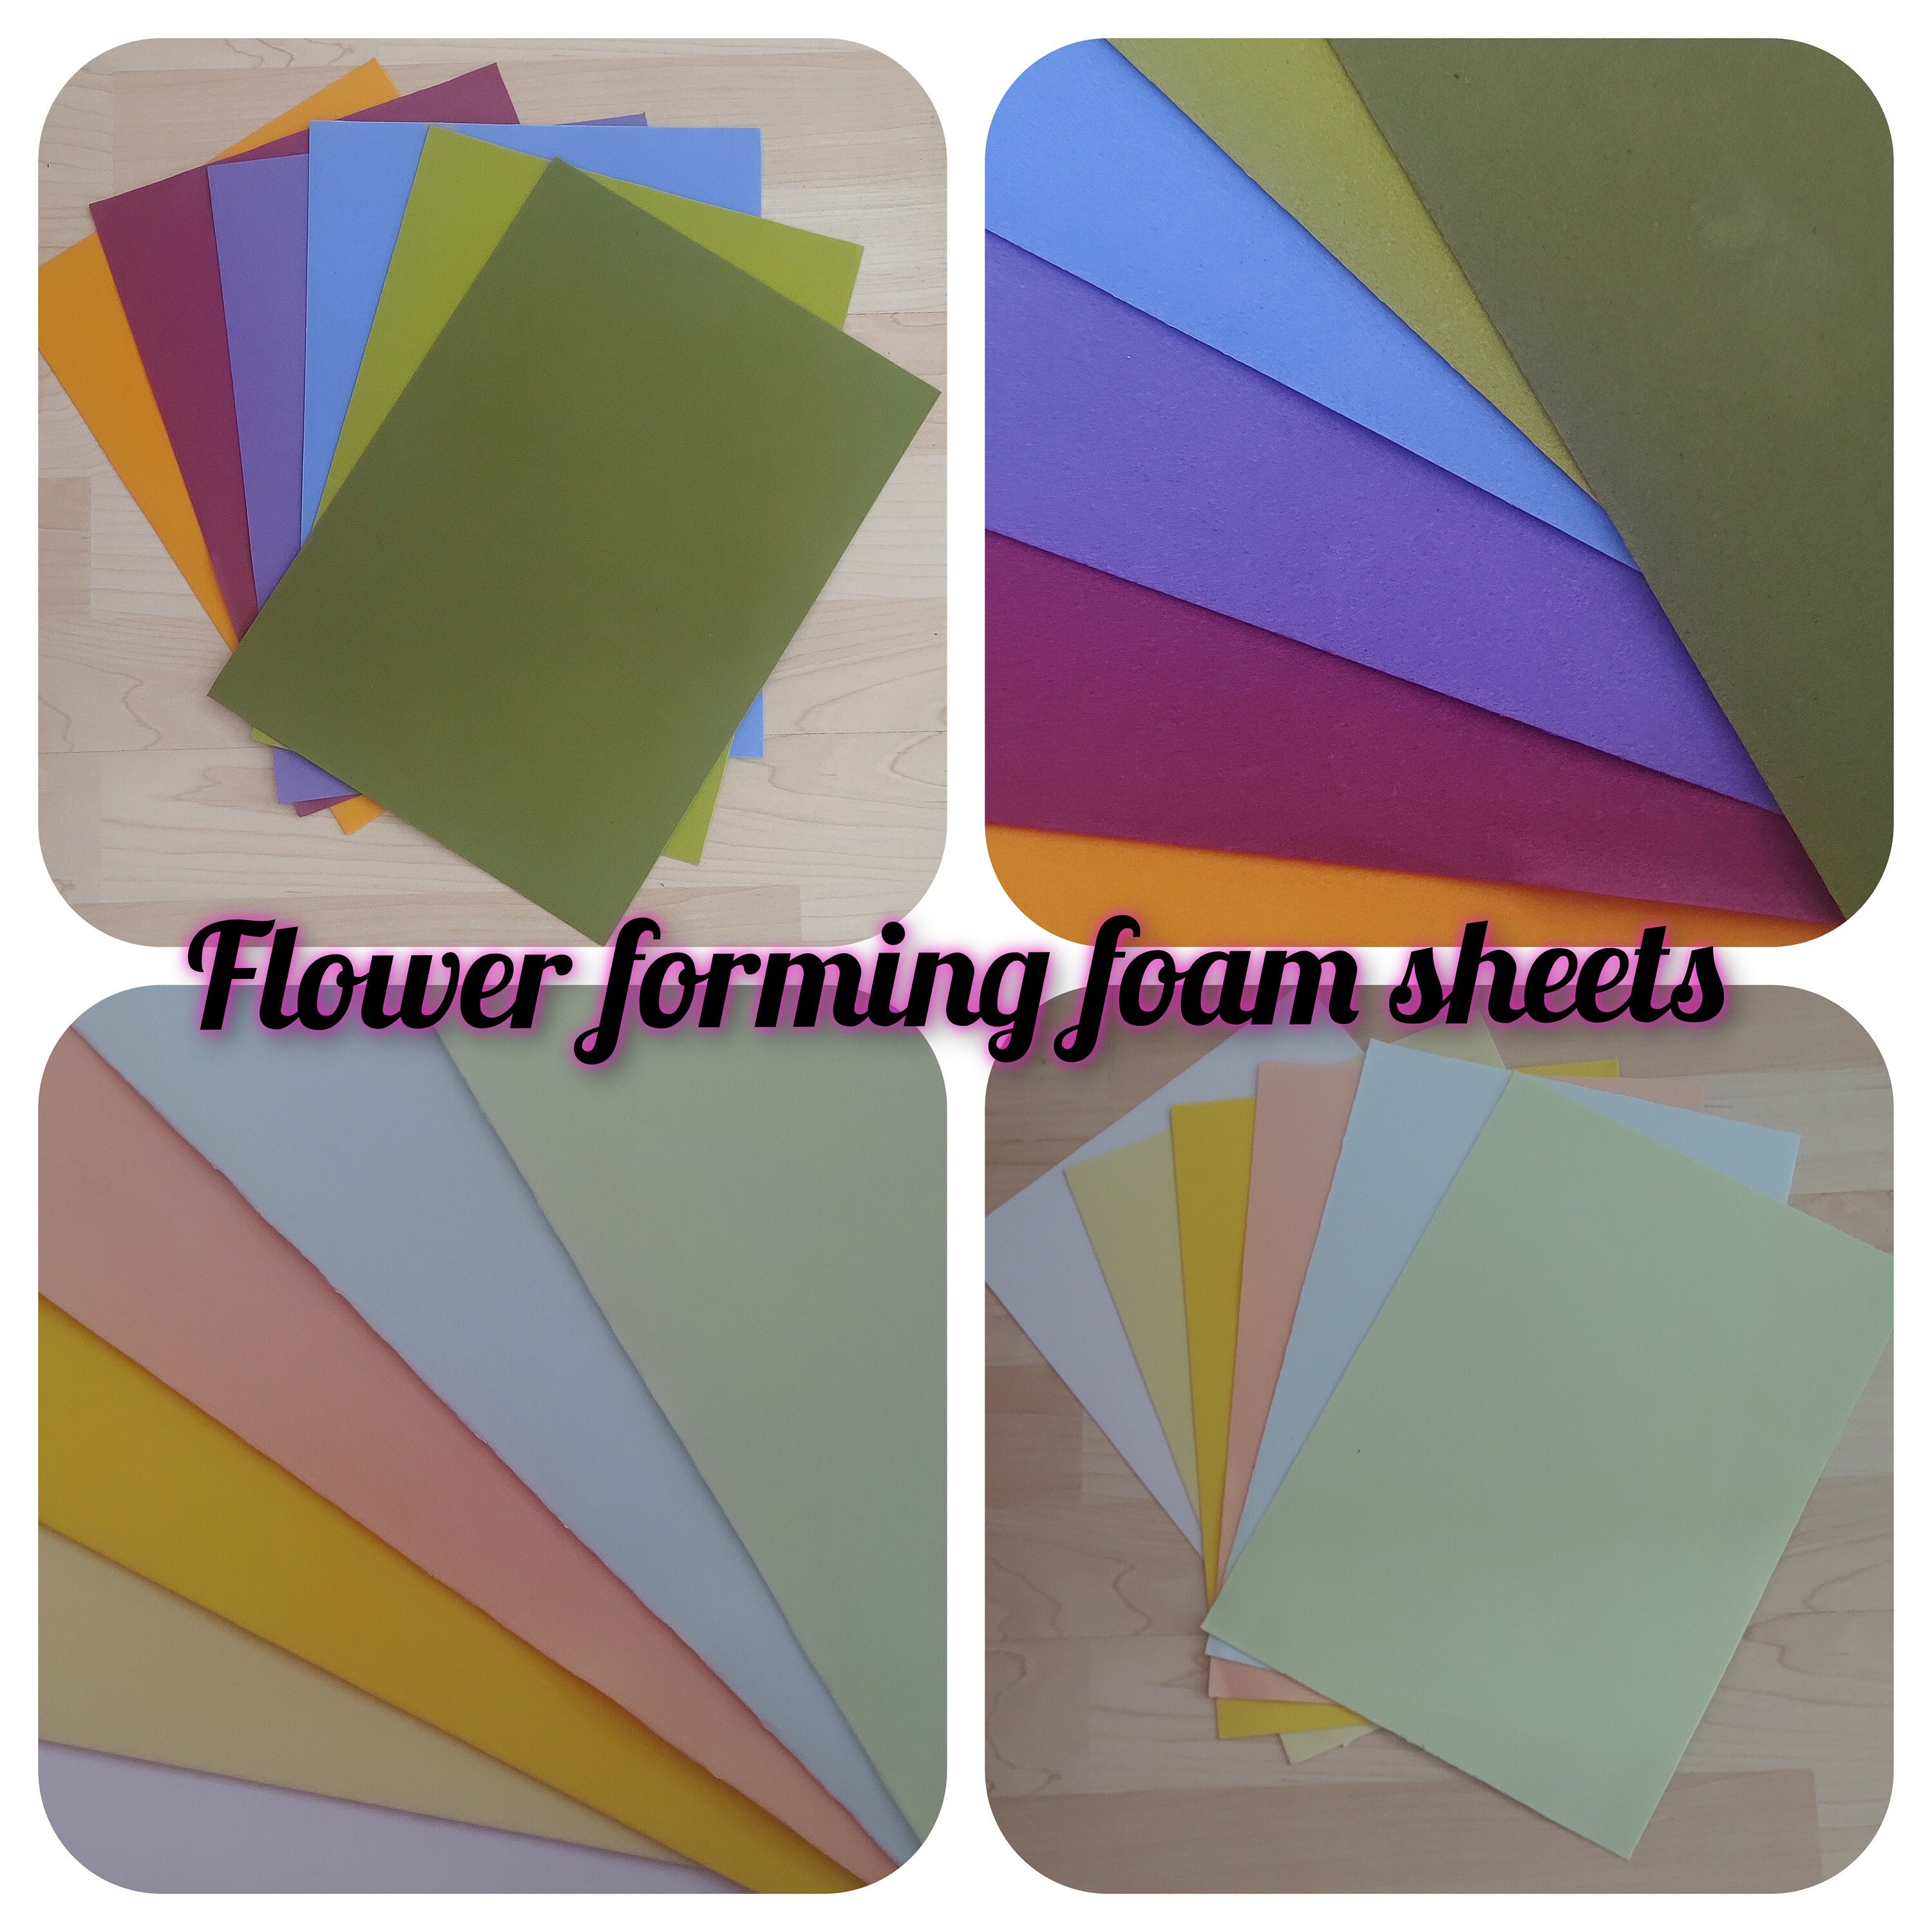 A4 EVA Craft Funky Foam Sheets 10 Pack 2mm Thick Approx 10 Assorted Colours